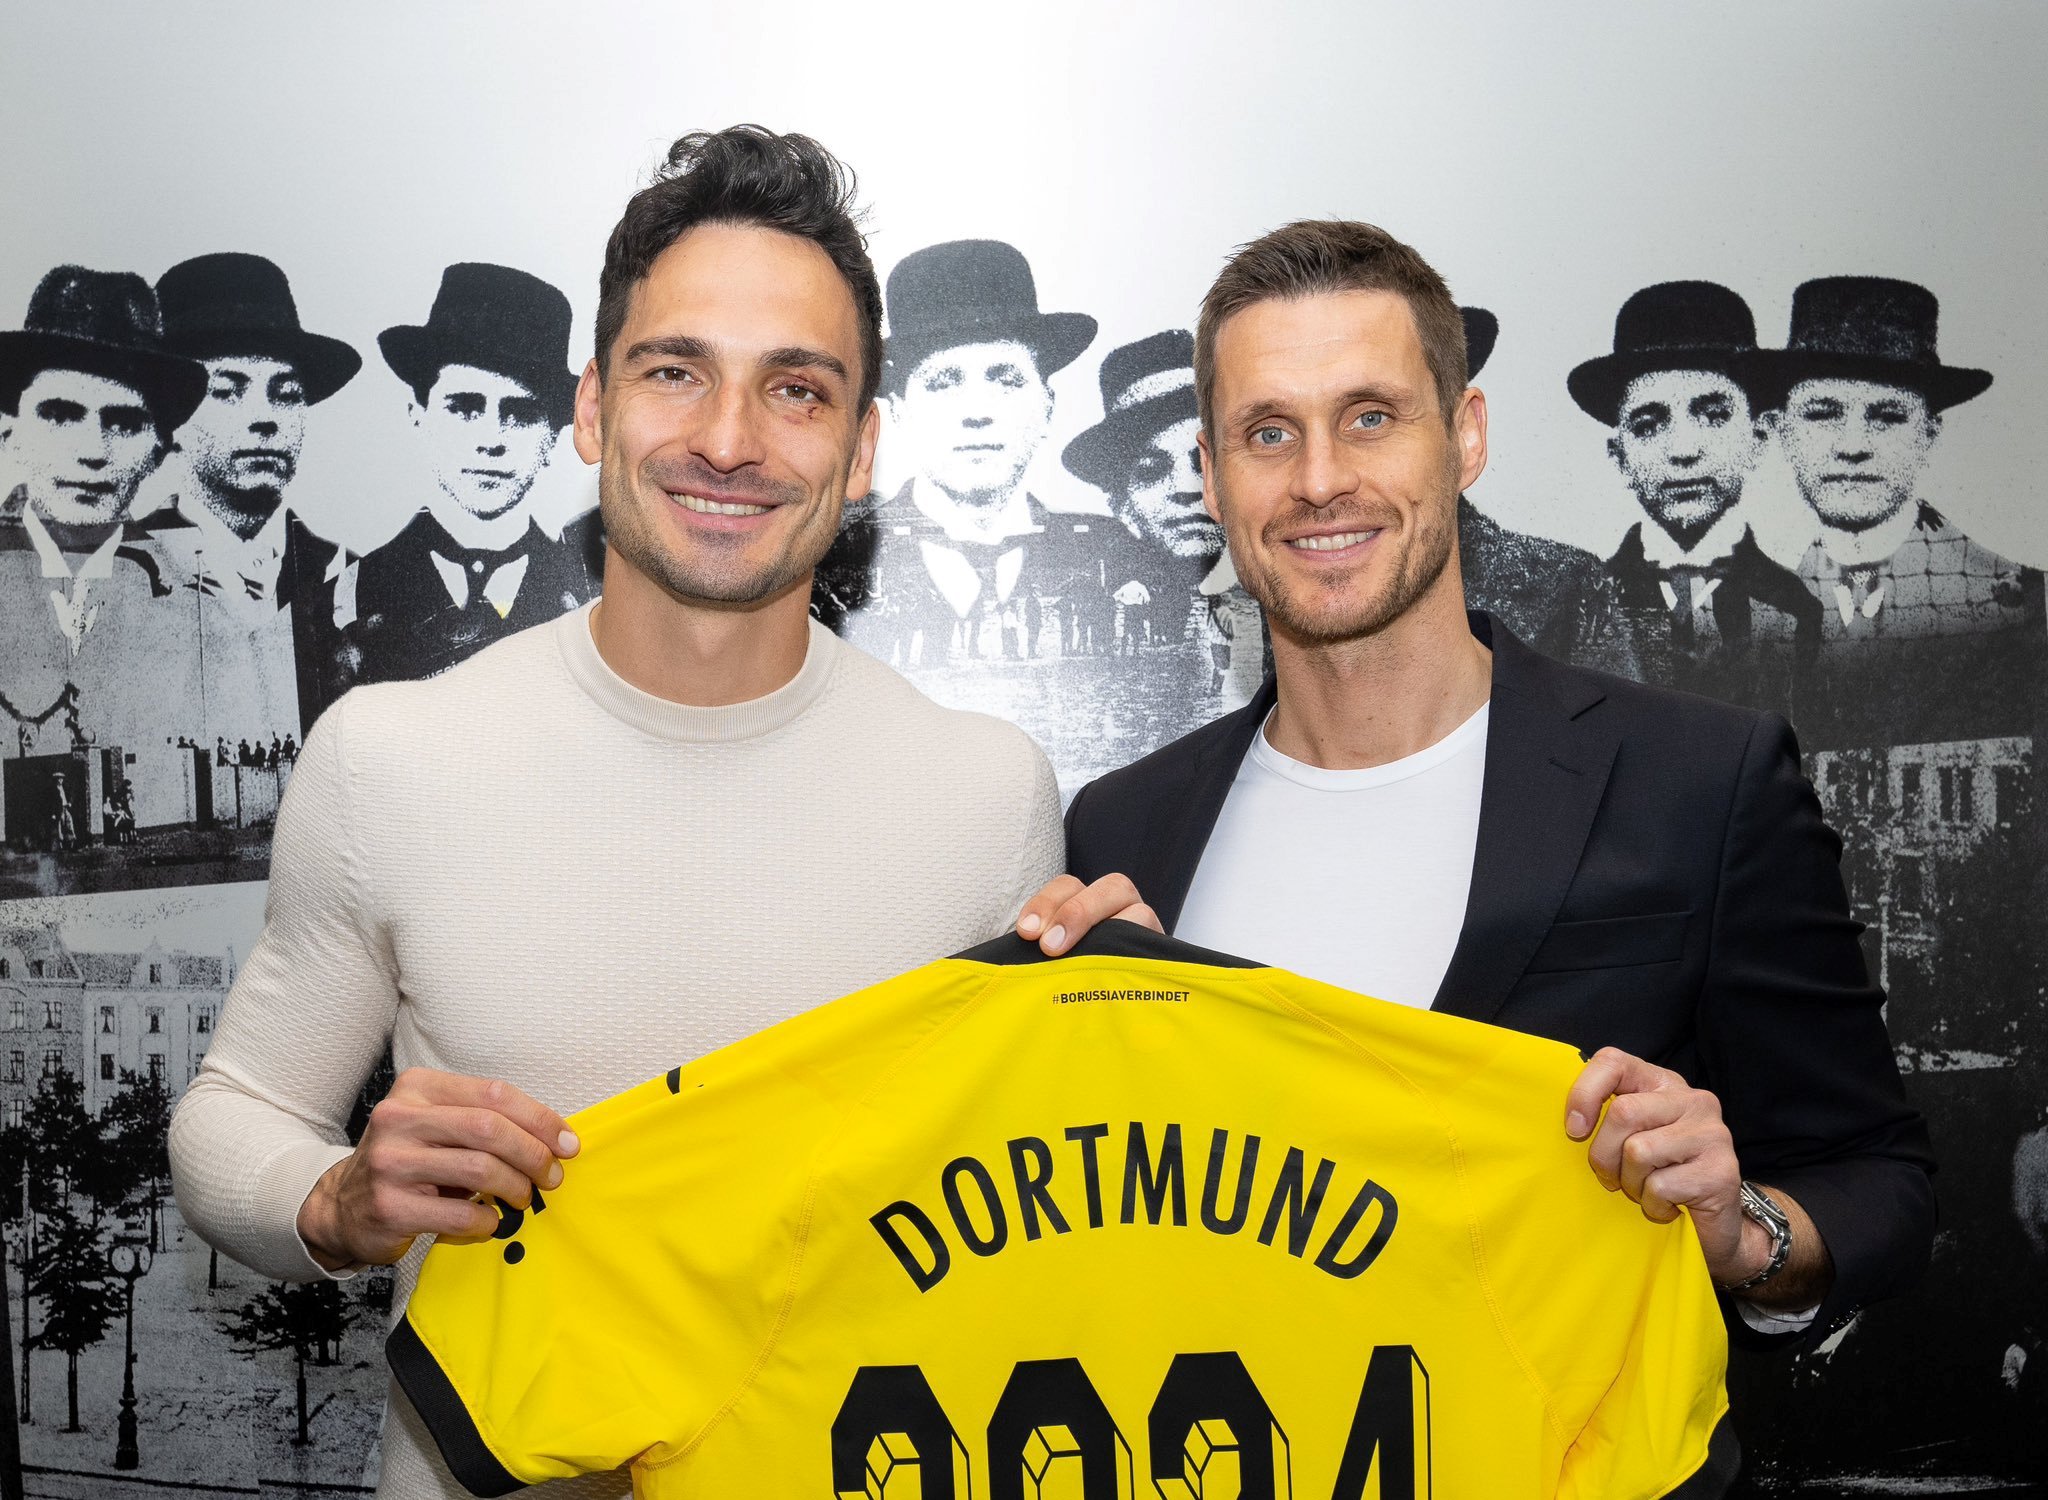 Dortmund signs Mats Hummels to a one-year contract